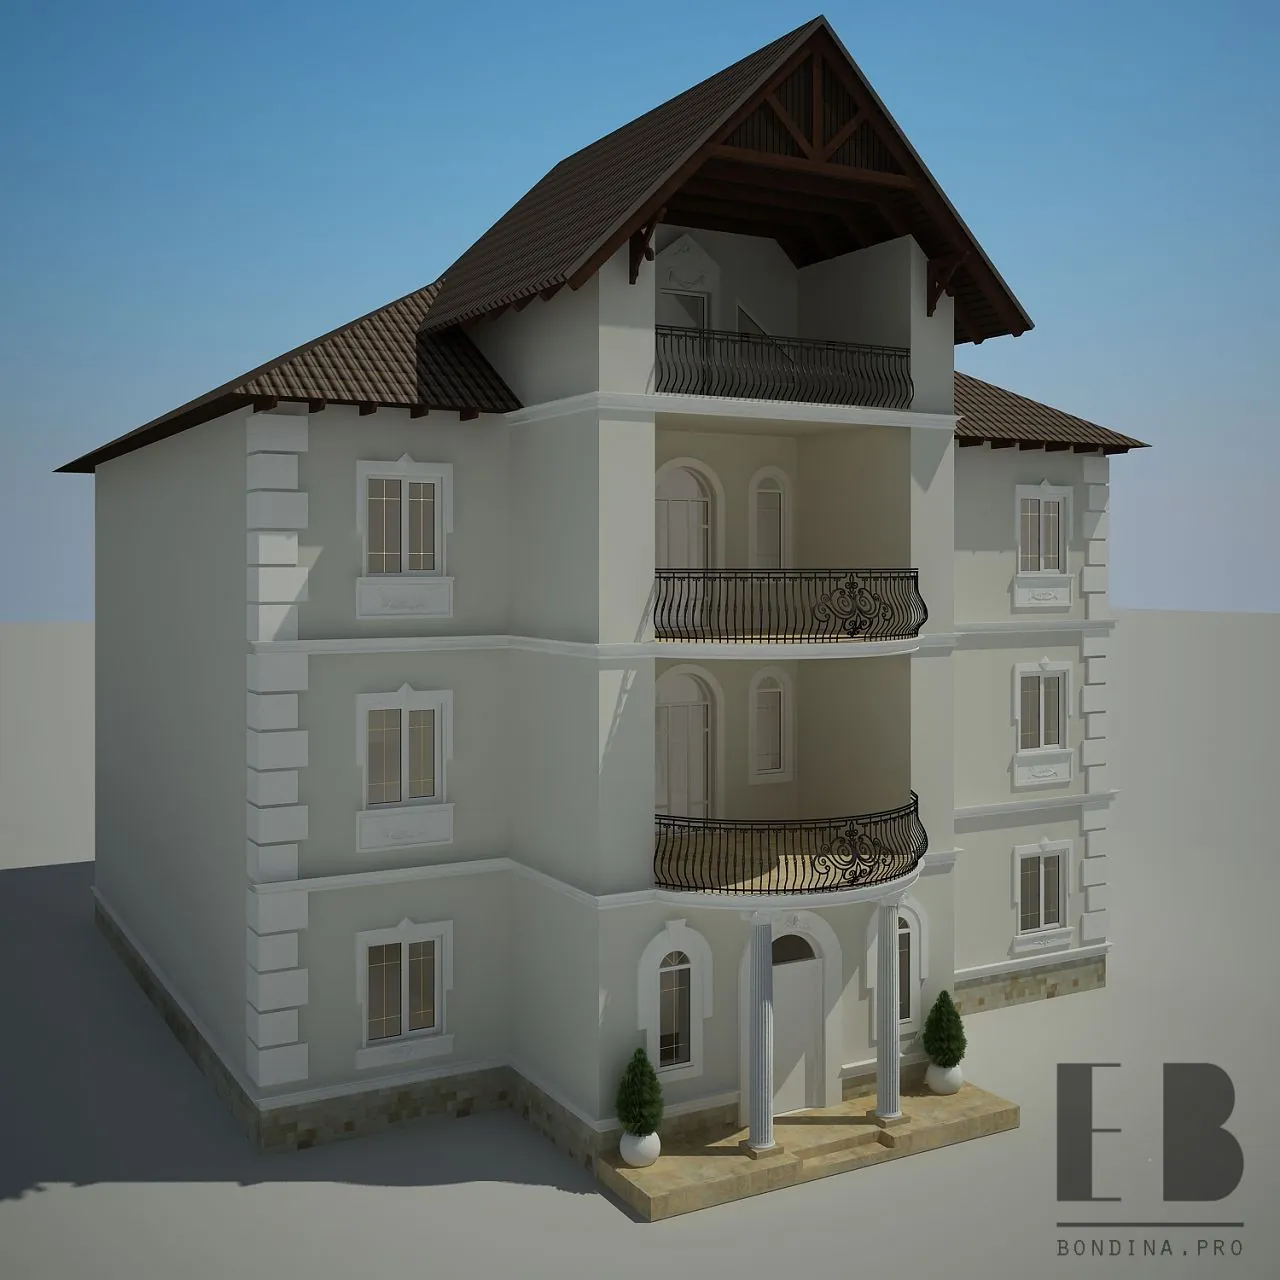 Reconstruction of the facade of a three-story house